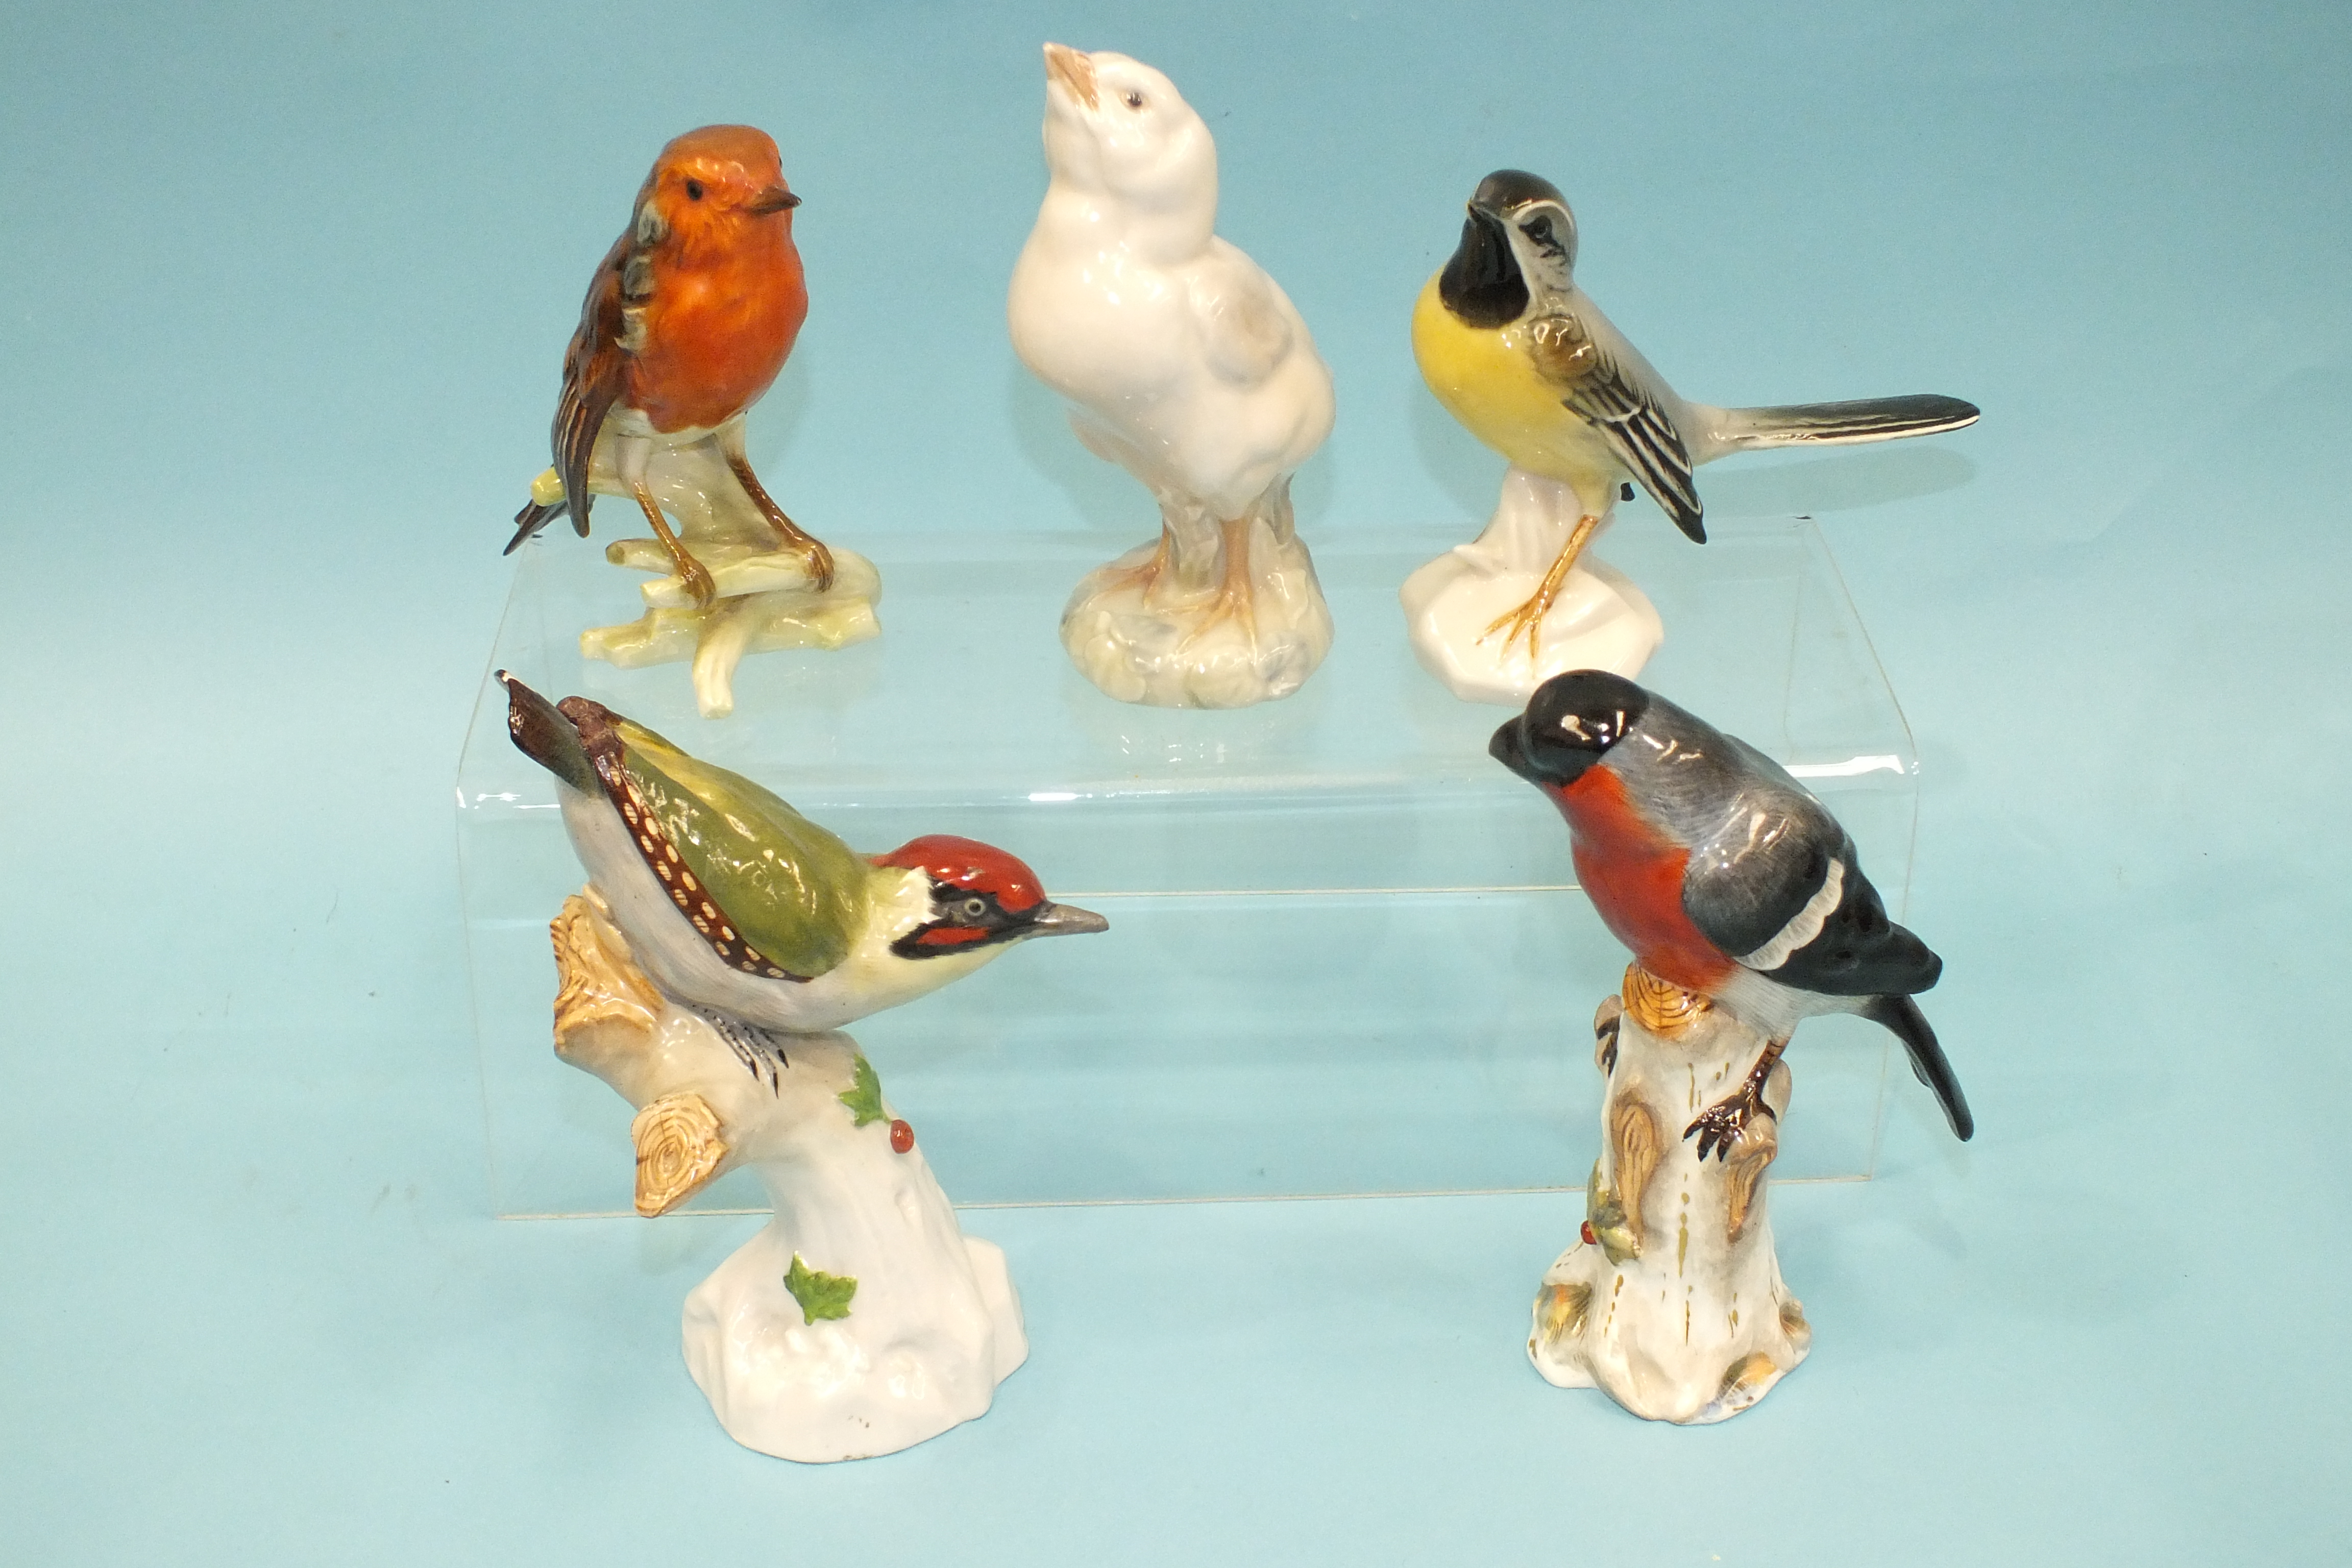 A 20th century porcelain model of a bullfinch perched on a tree stump, in the Meissen style, 16cm